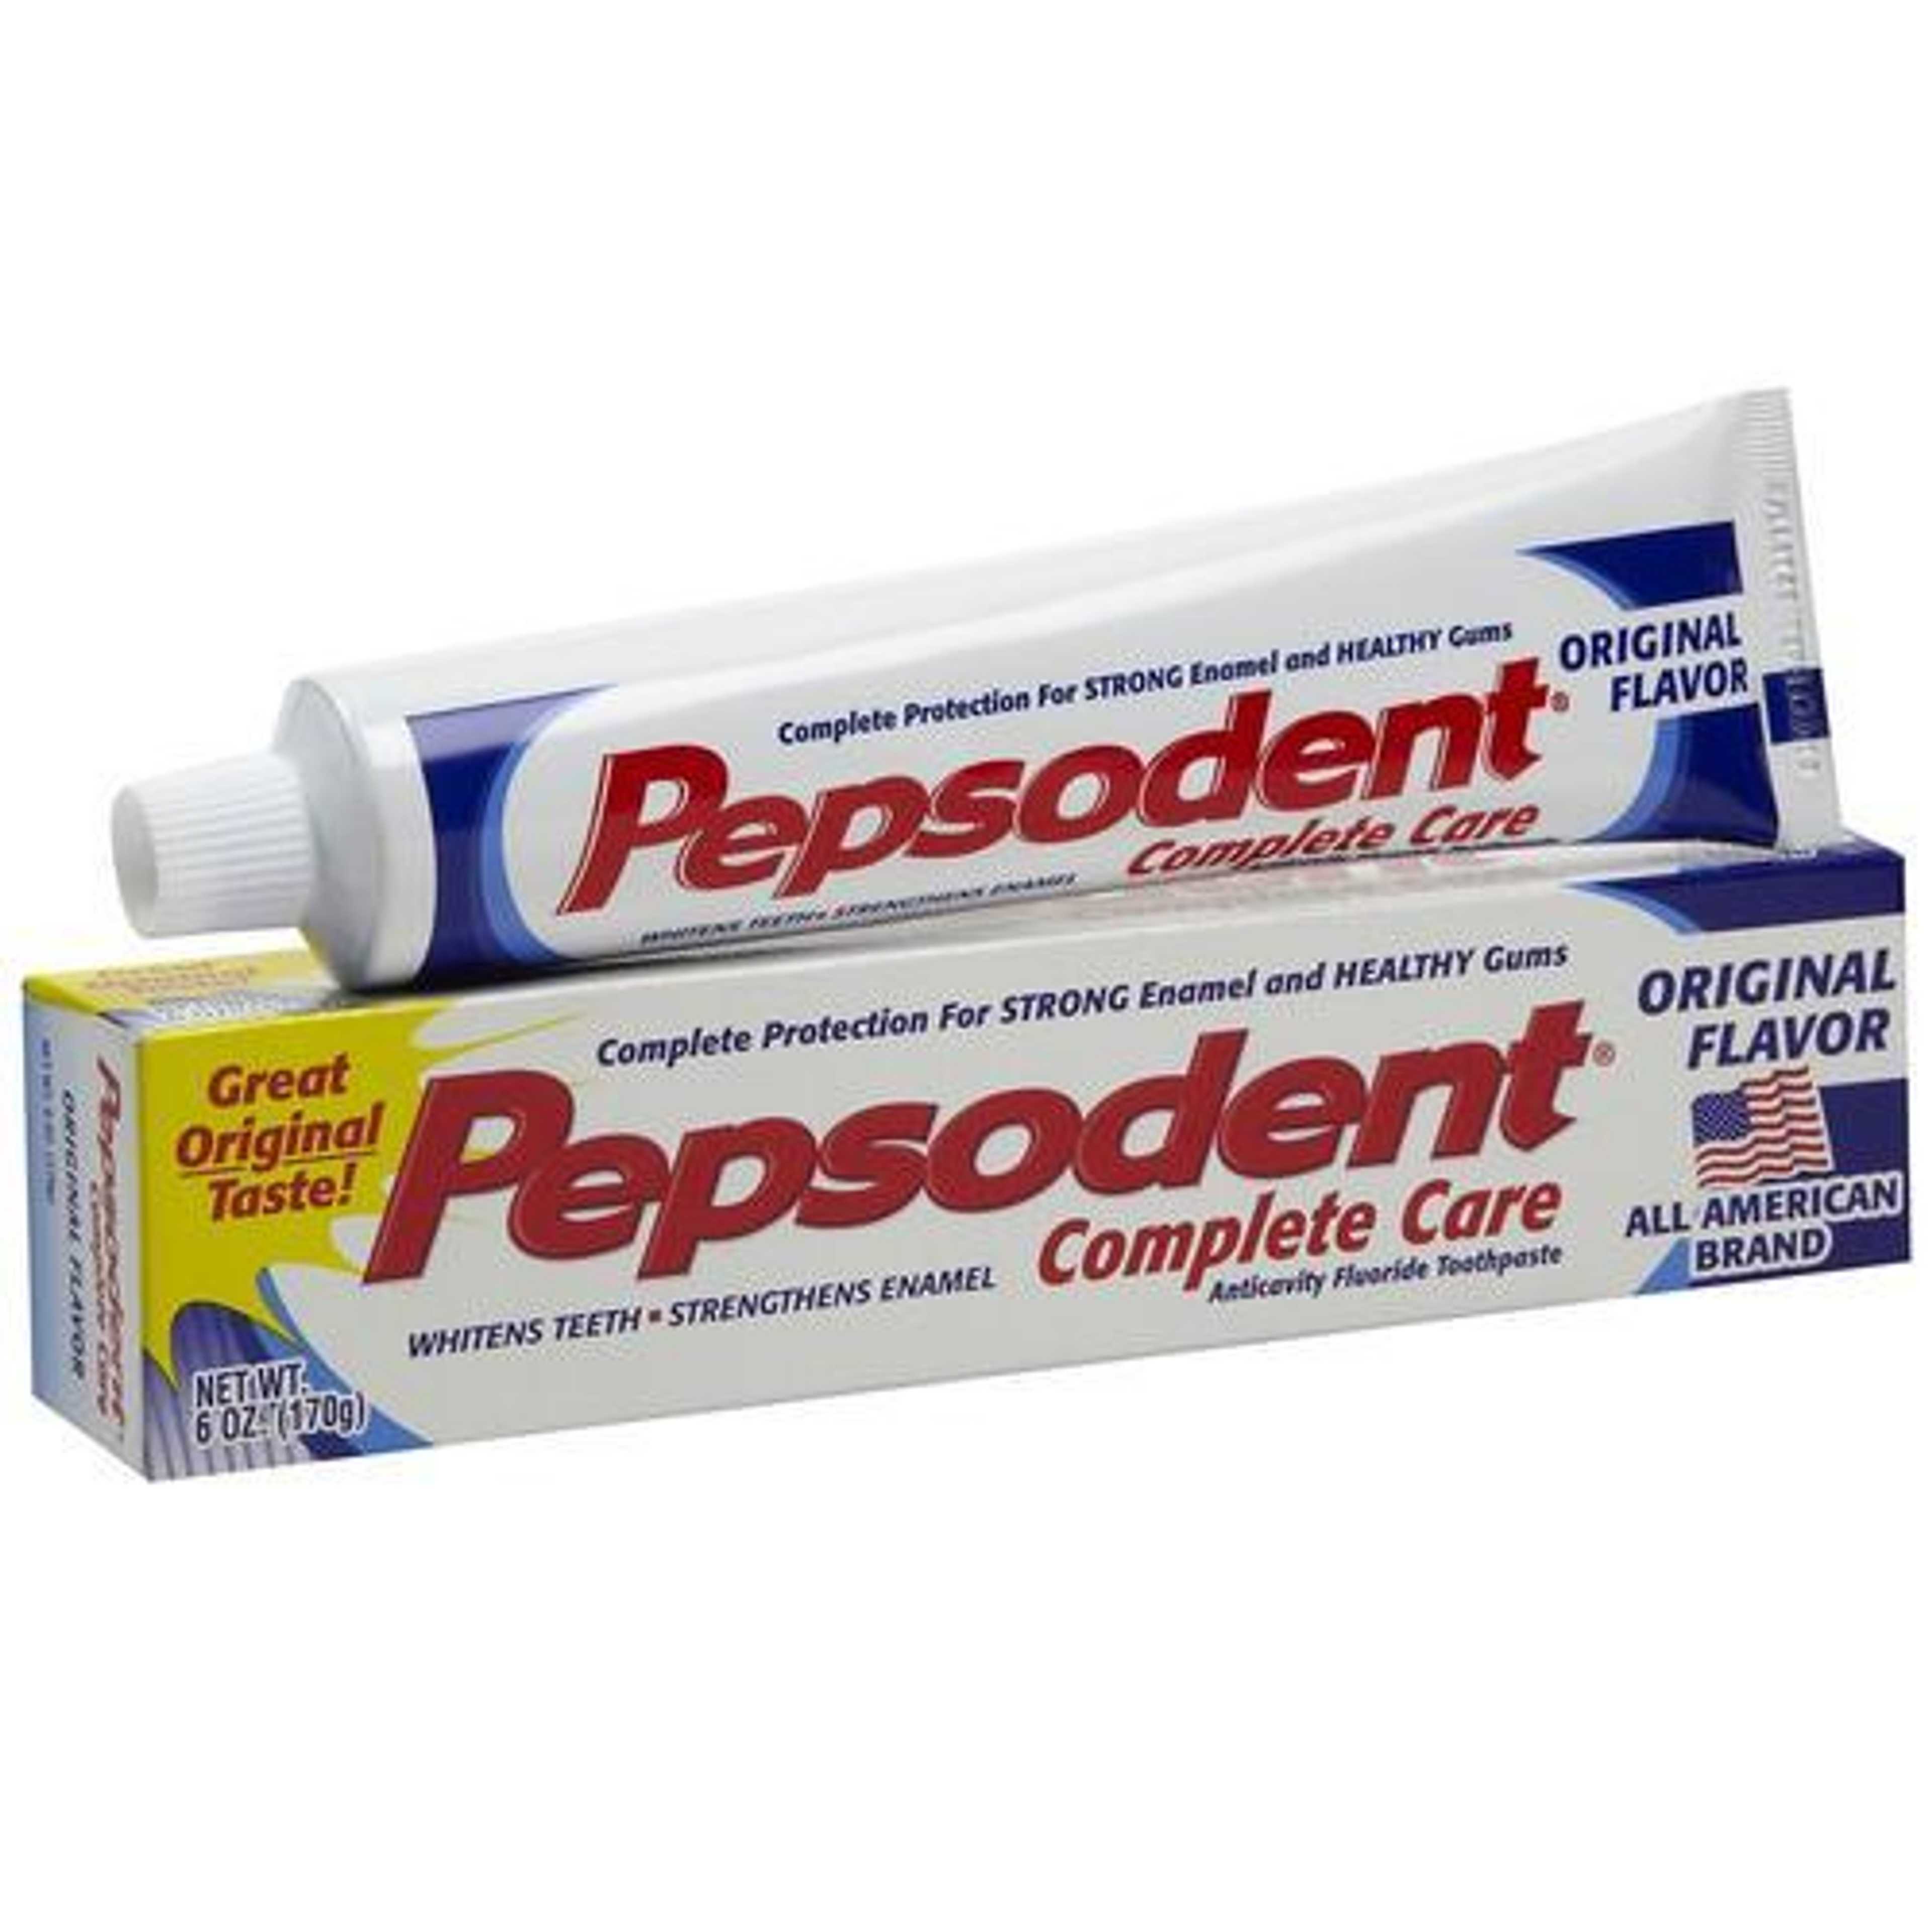 PEPSODENT TOOTH PASTE COMPLETE CARE ORIGINAL FLAVOR 156G (USA Imported)